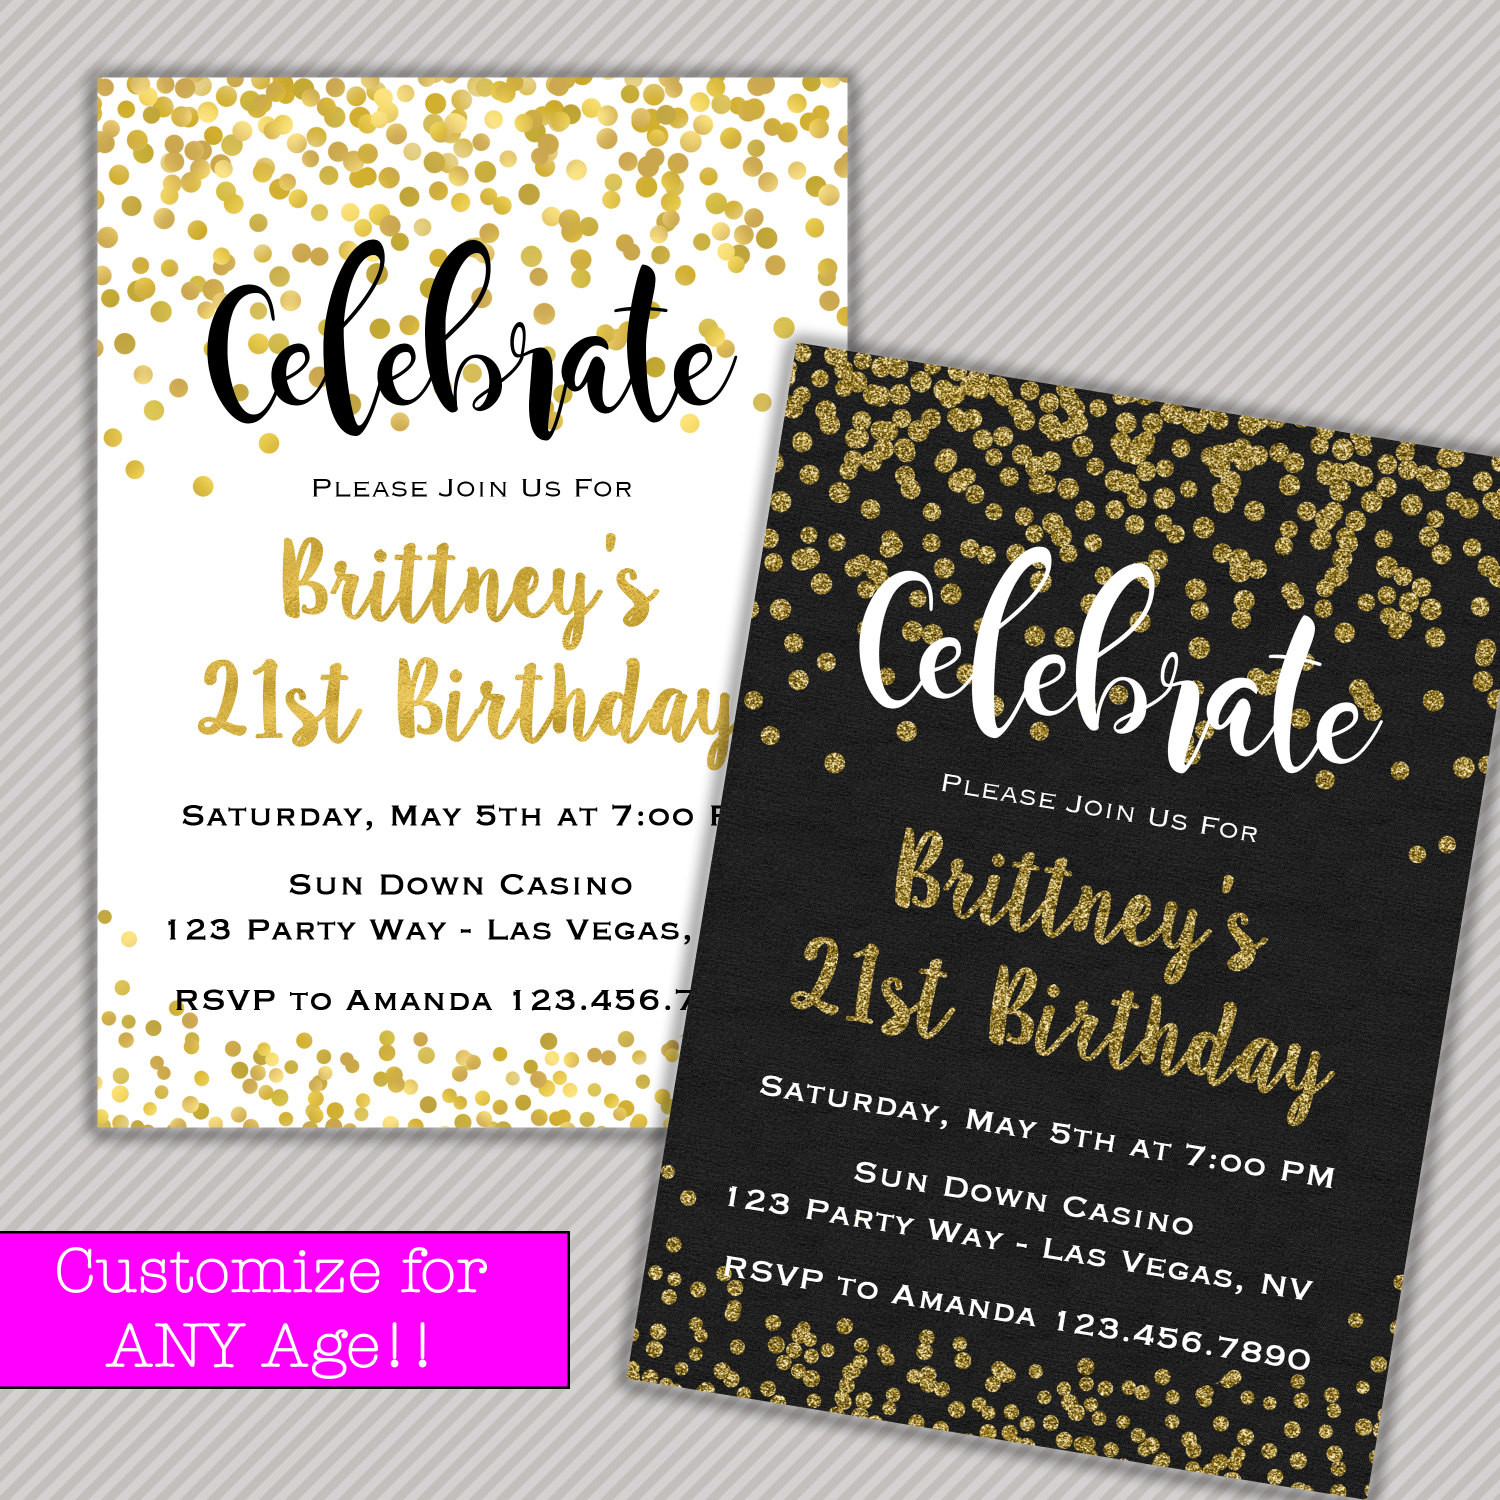 Adult Birthday Party Invitations
 Adult Birthday Invitation Adult Party by SophisticatedSwan